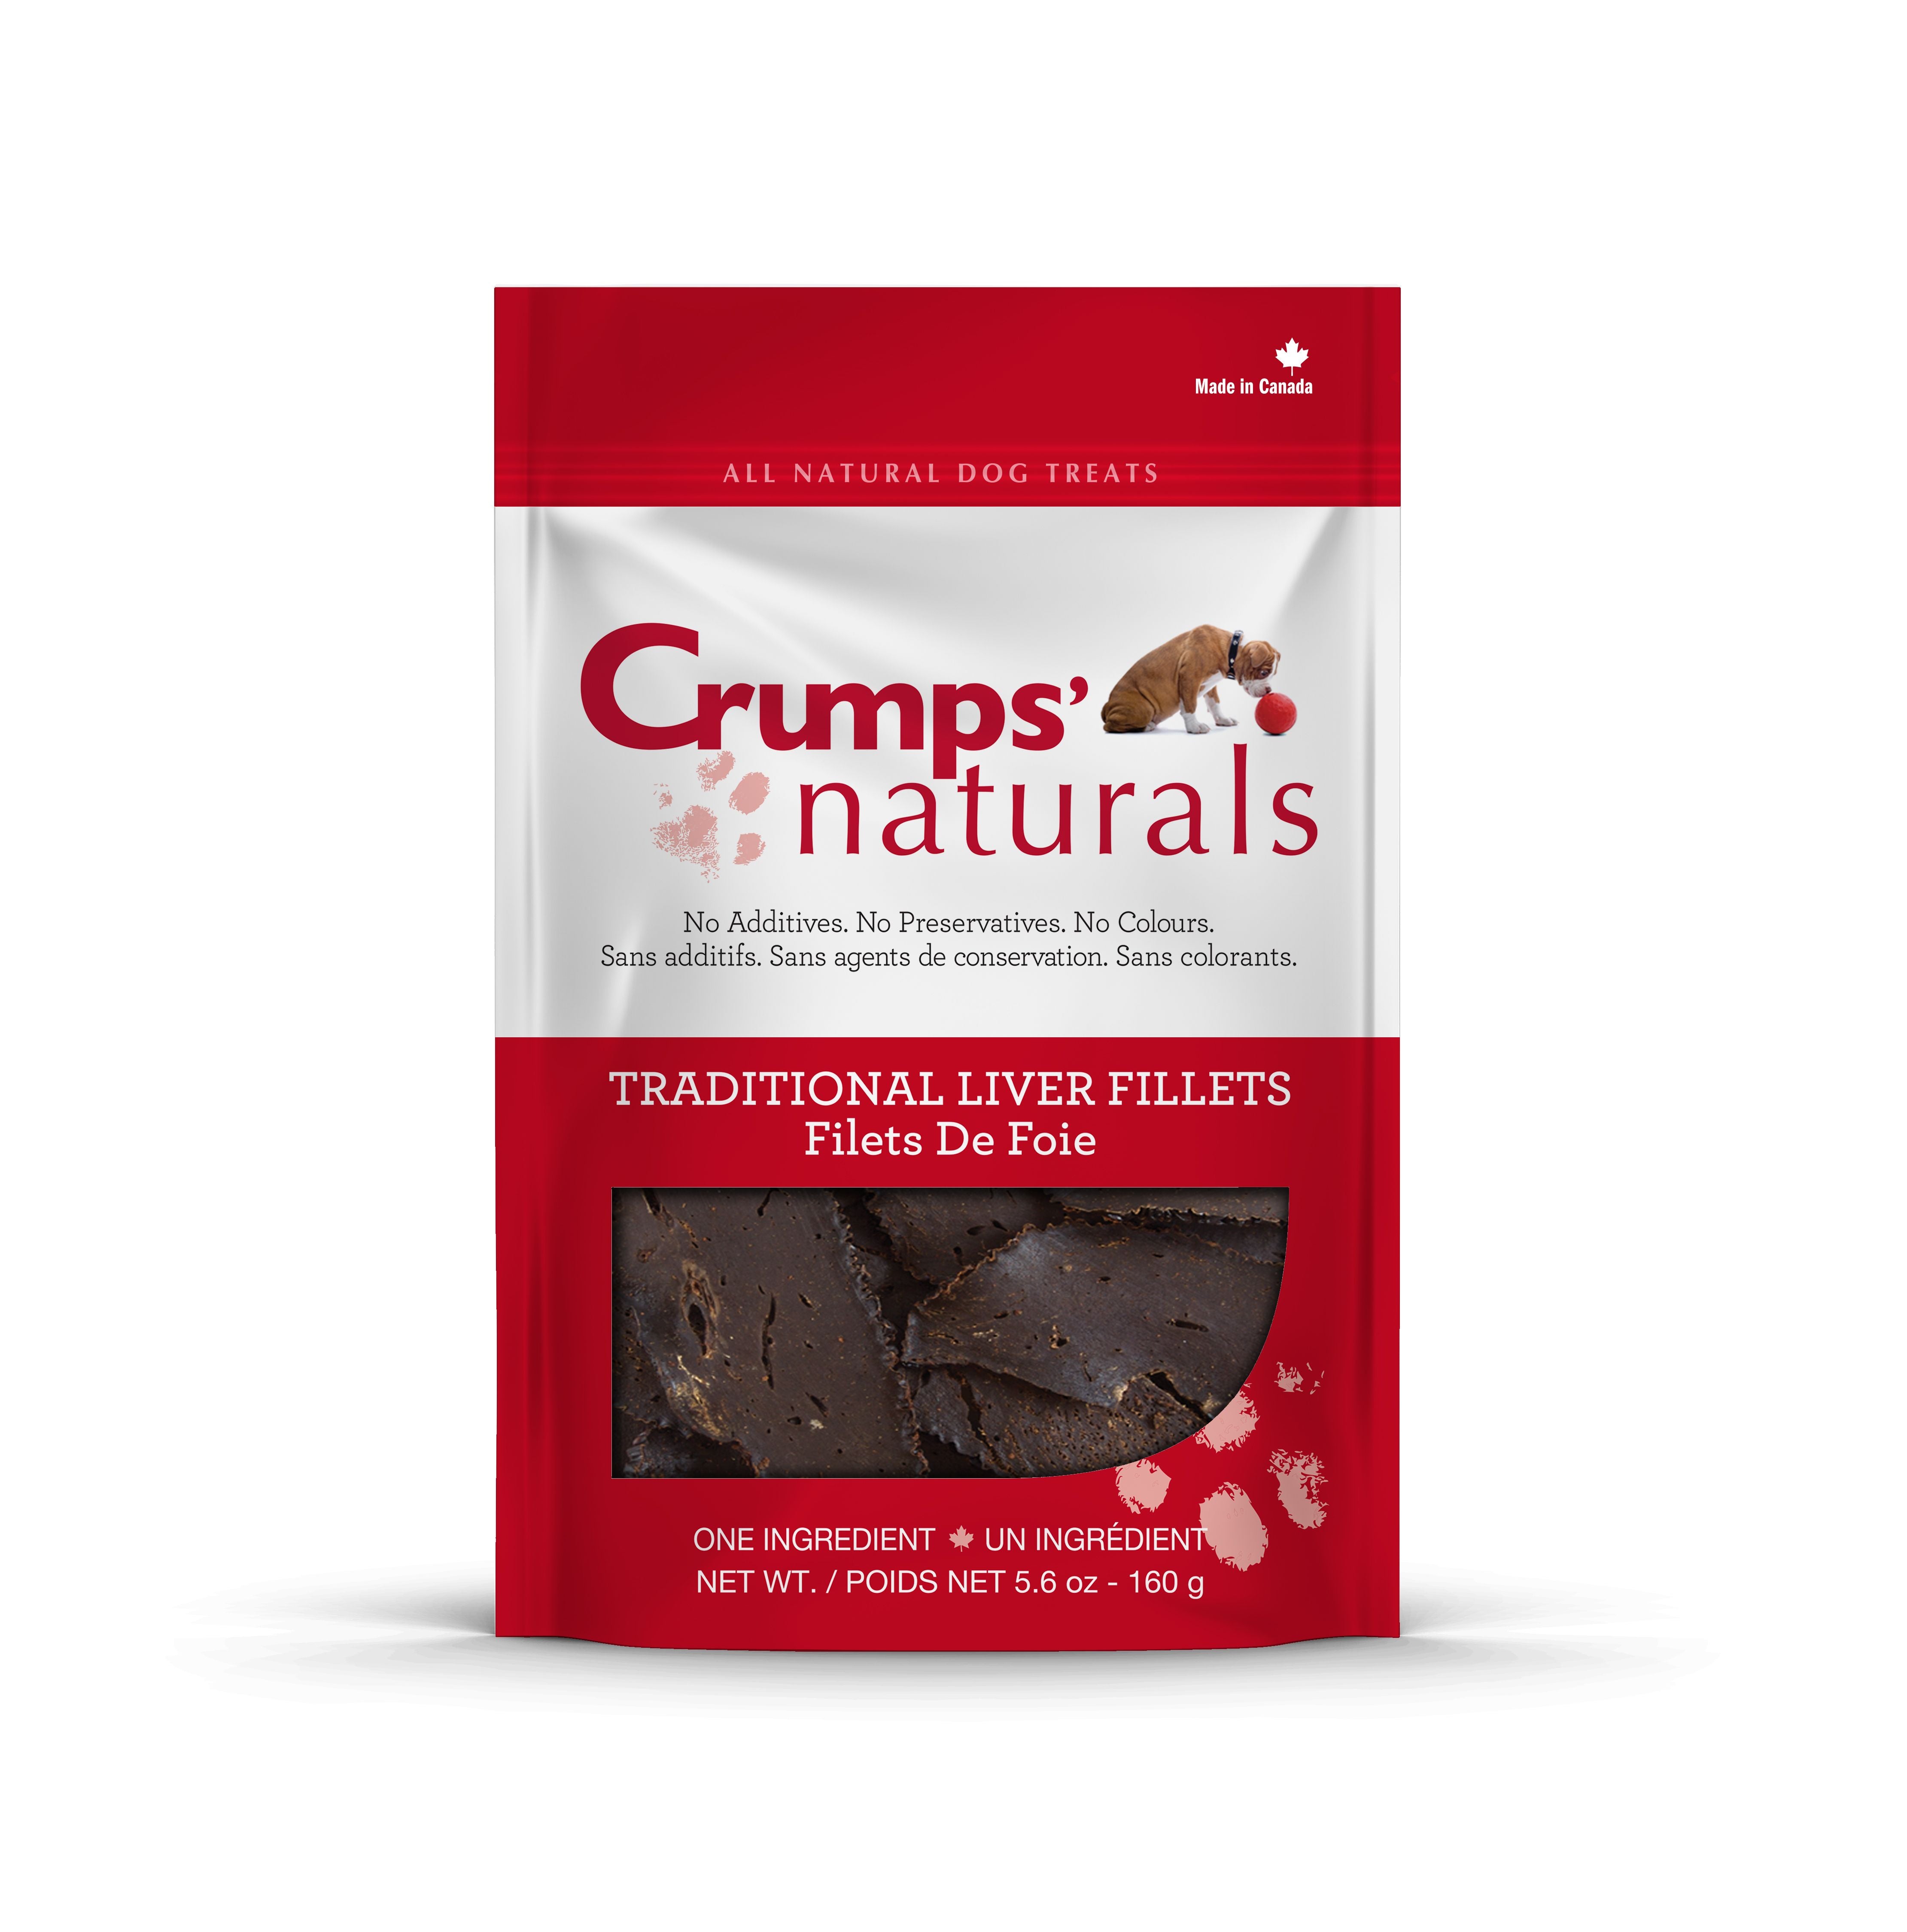 Crumps' Naturals - Traditional Liver Fillets Treat - ARMOR THE POOCH